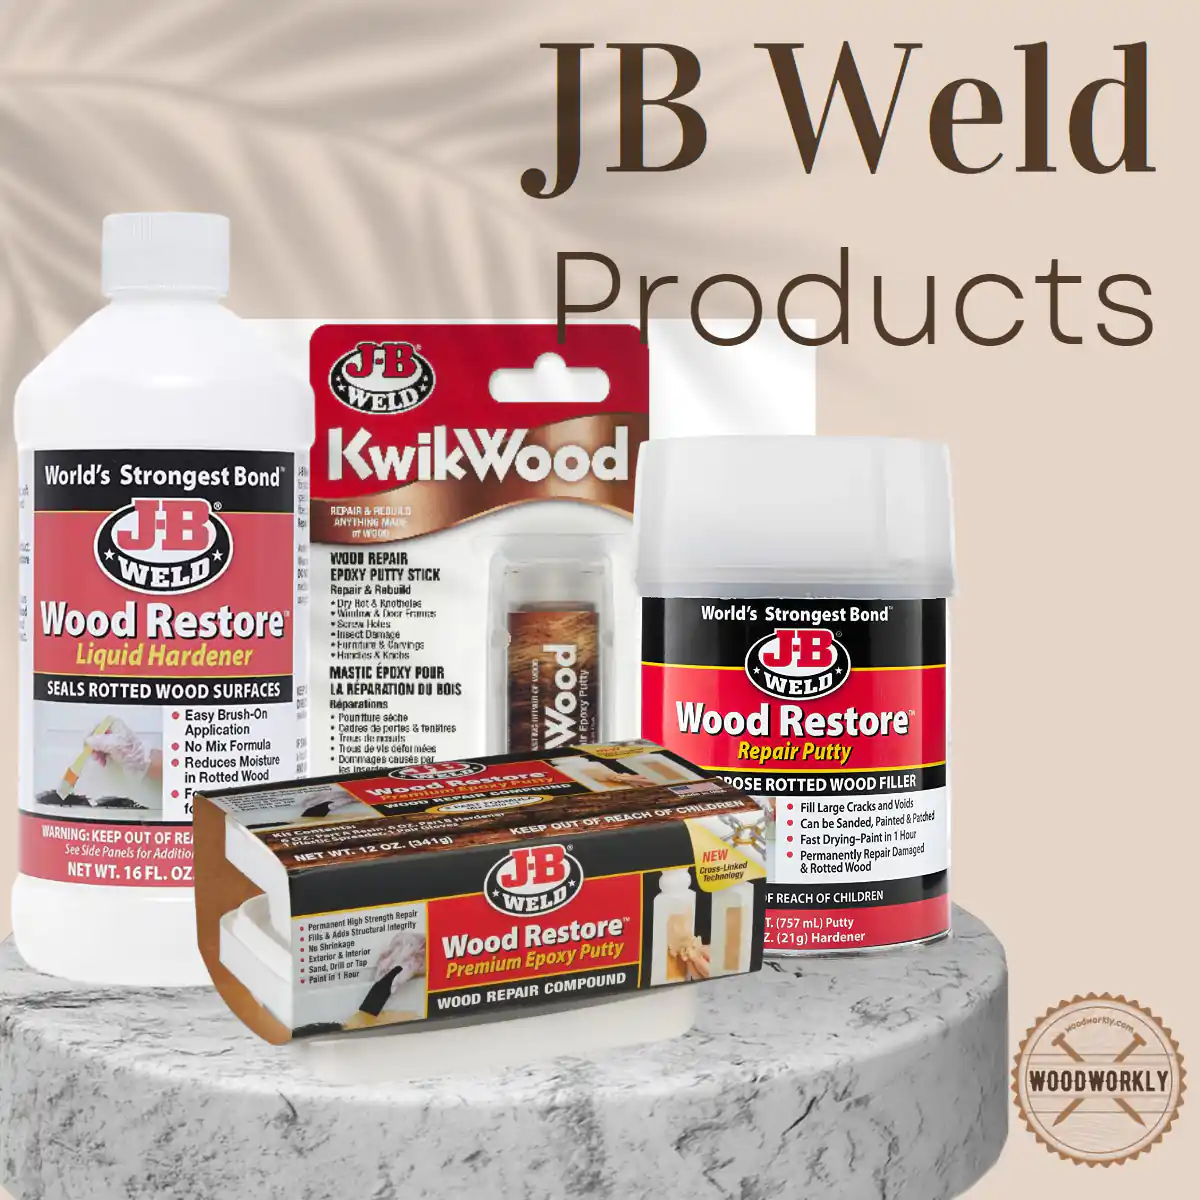 JB weld products